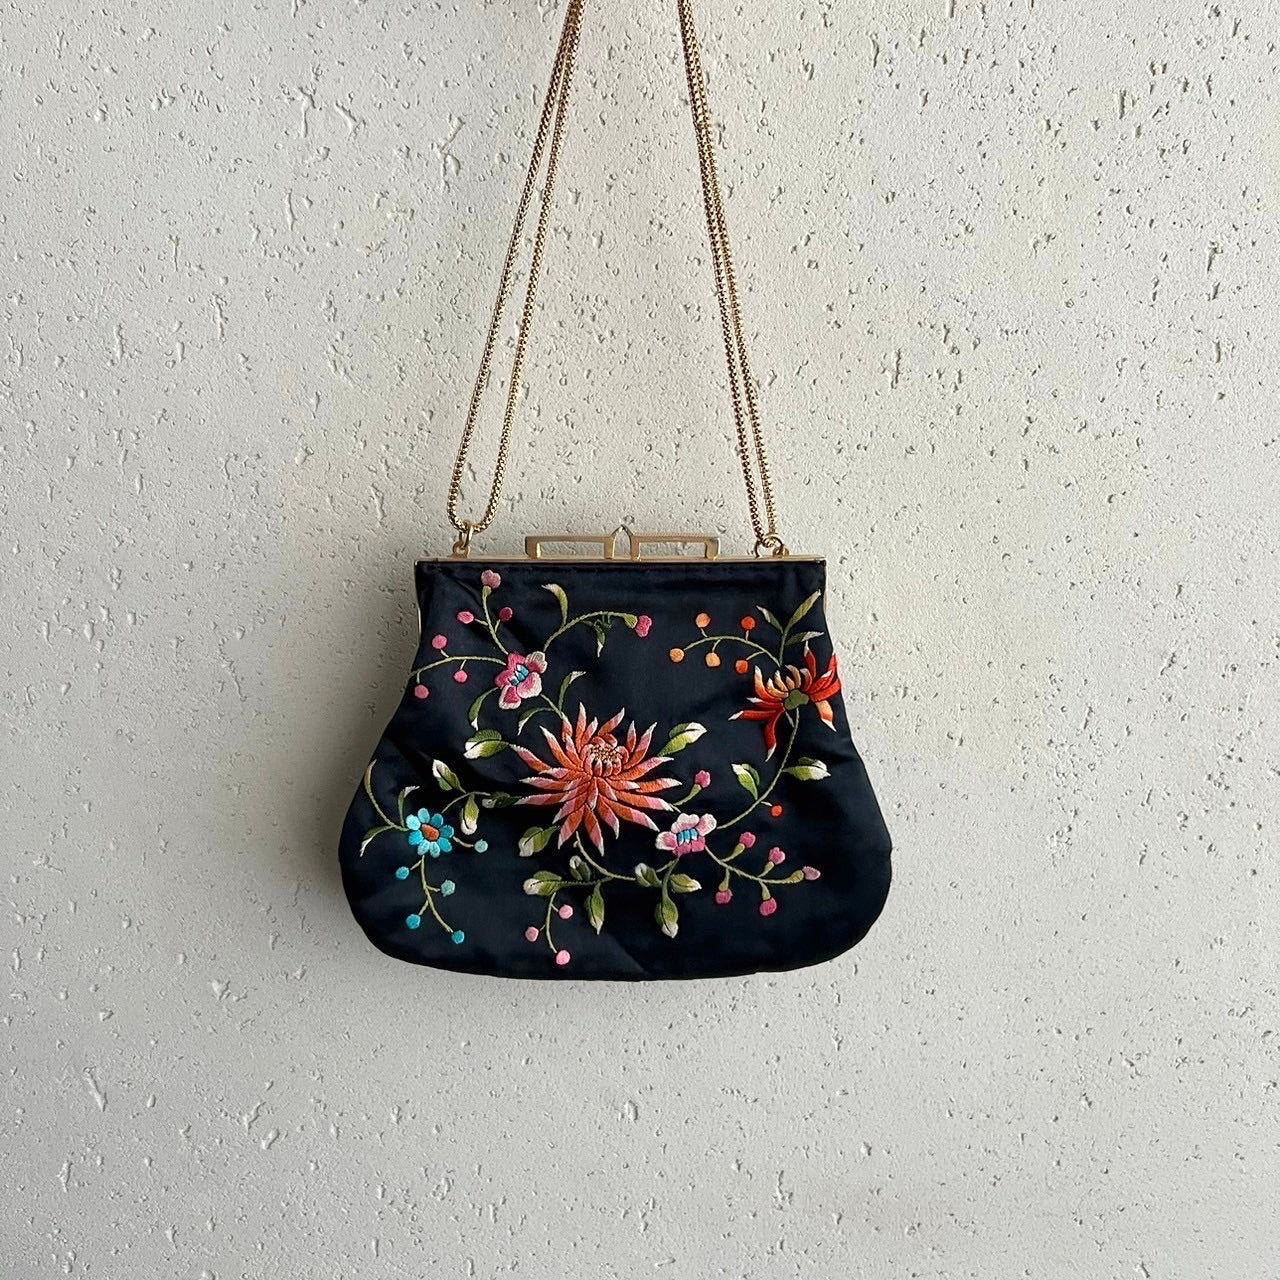 60s Hand Made Embroidery Bag